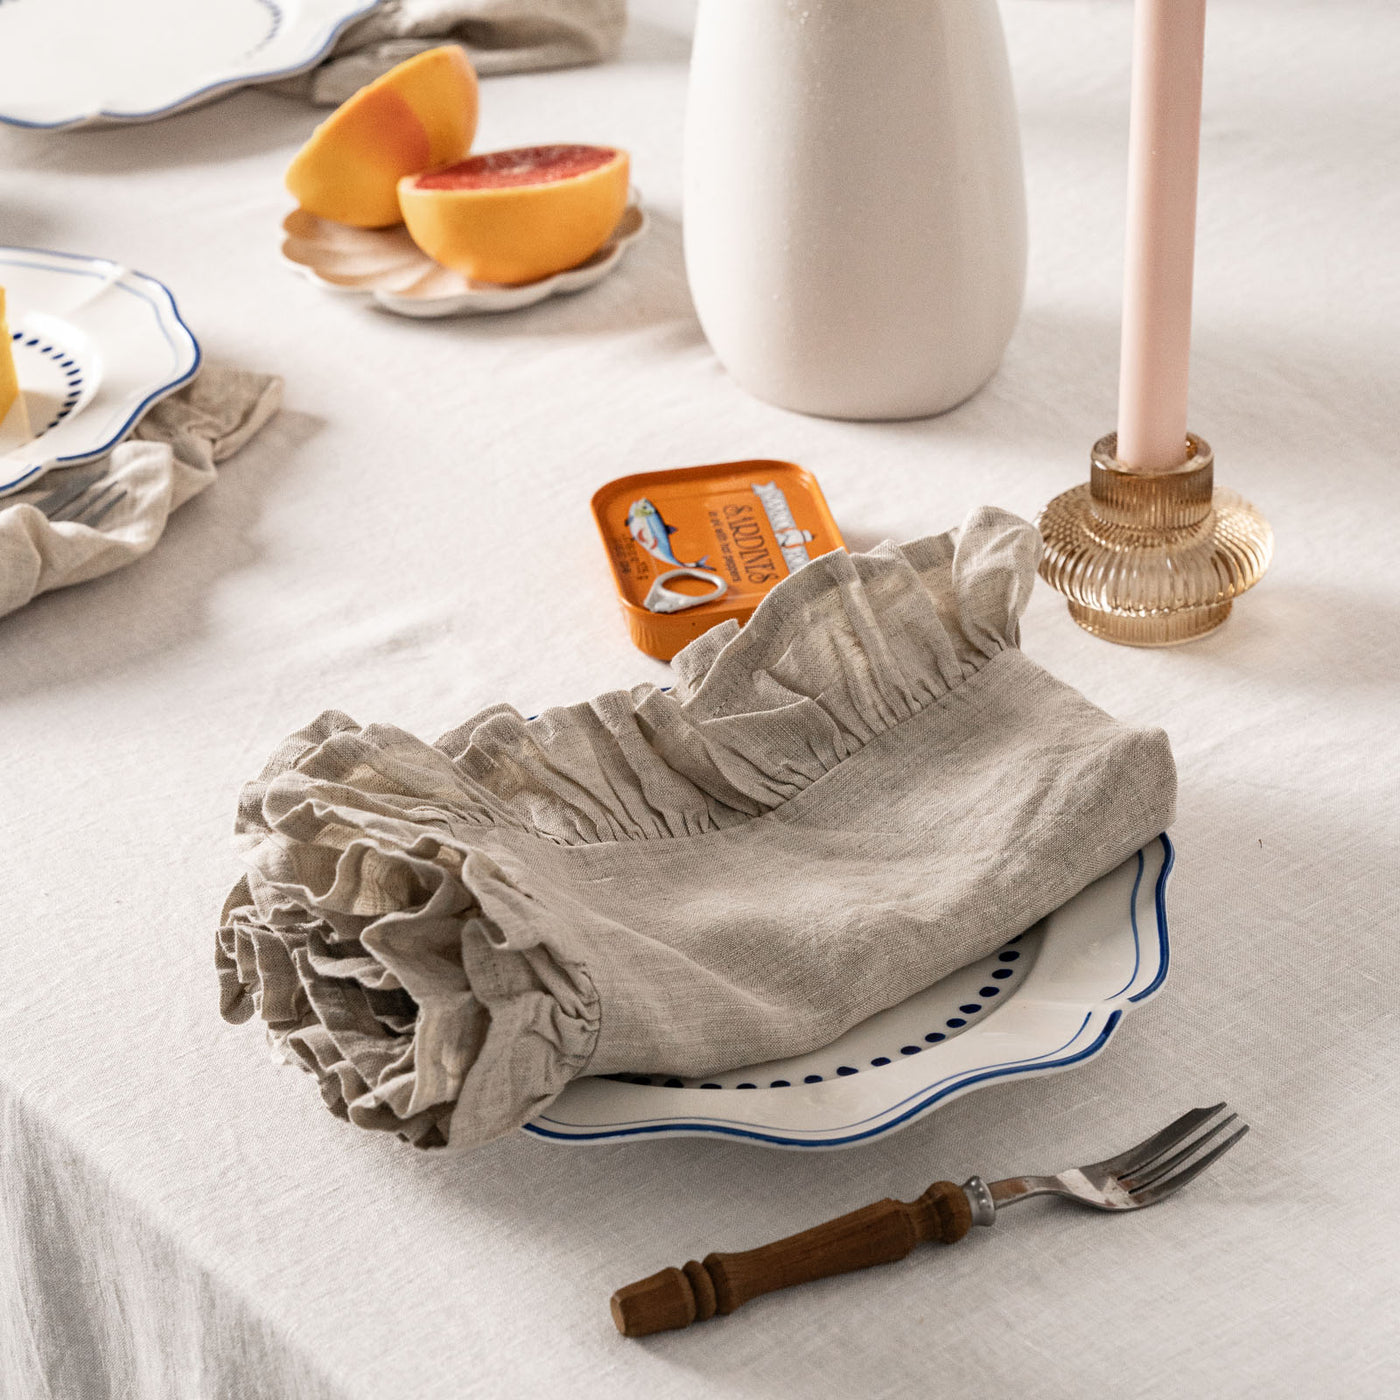 French Flax Linen Ruffles Napkins in Natural